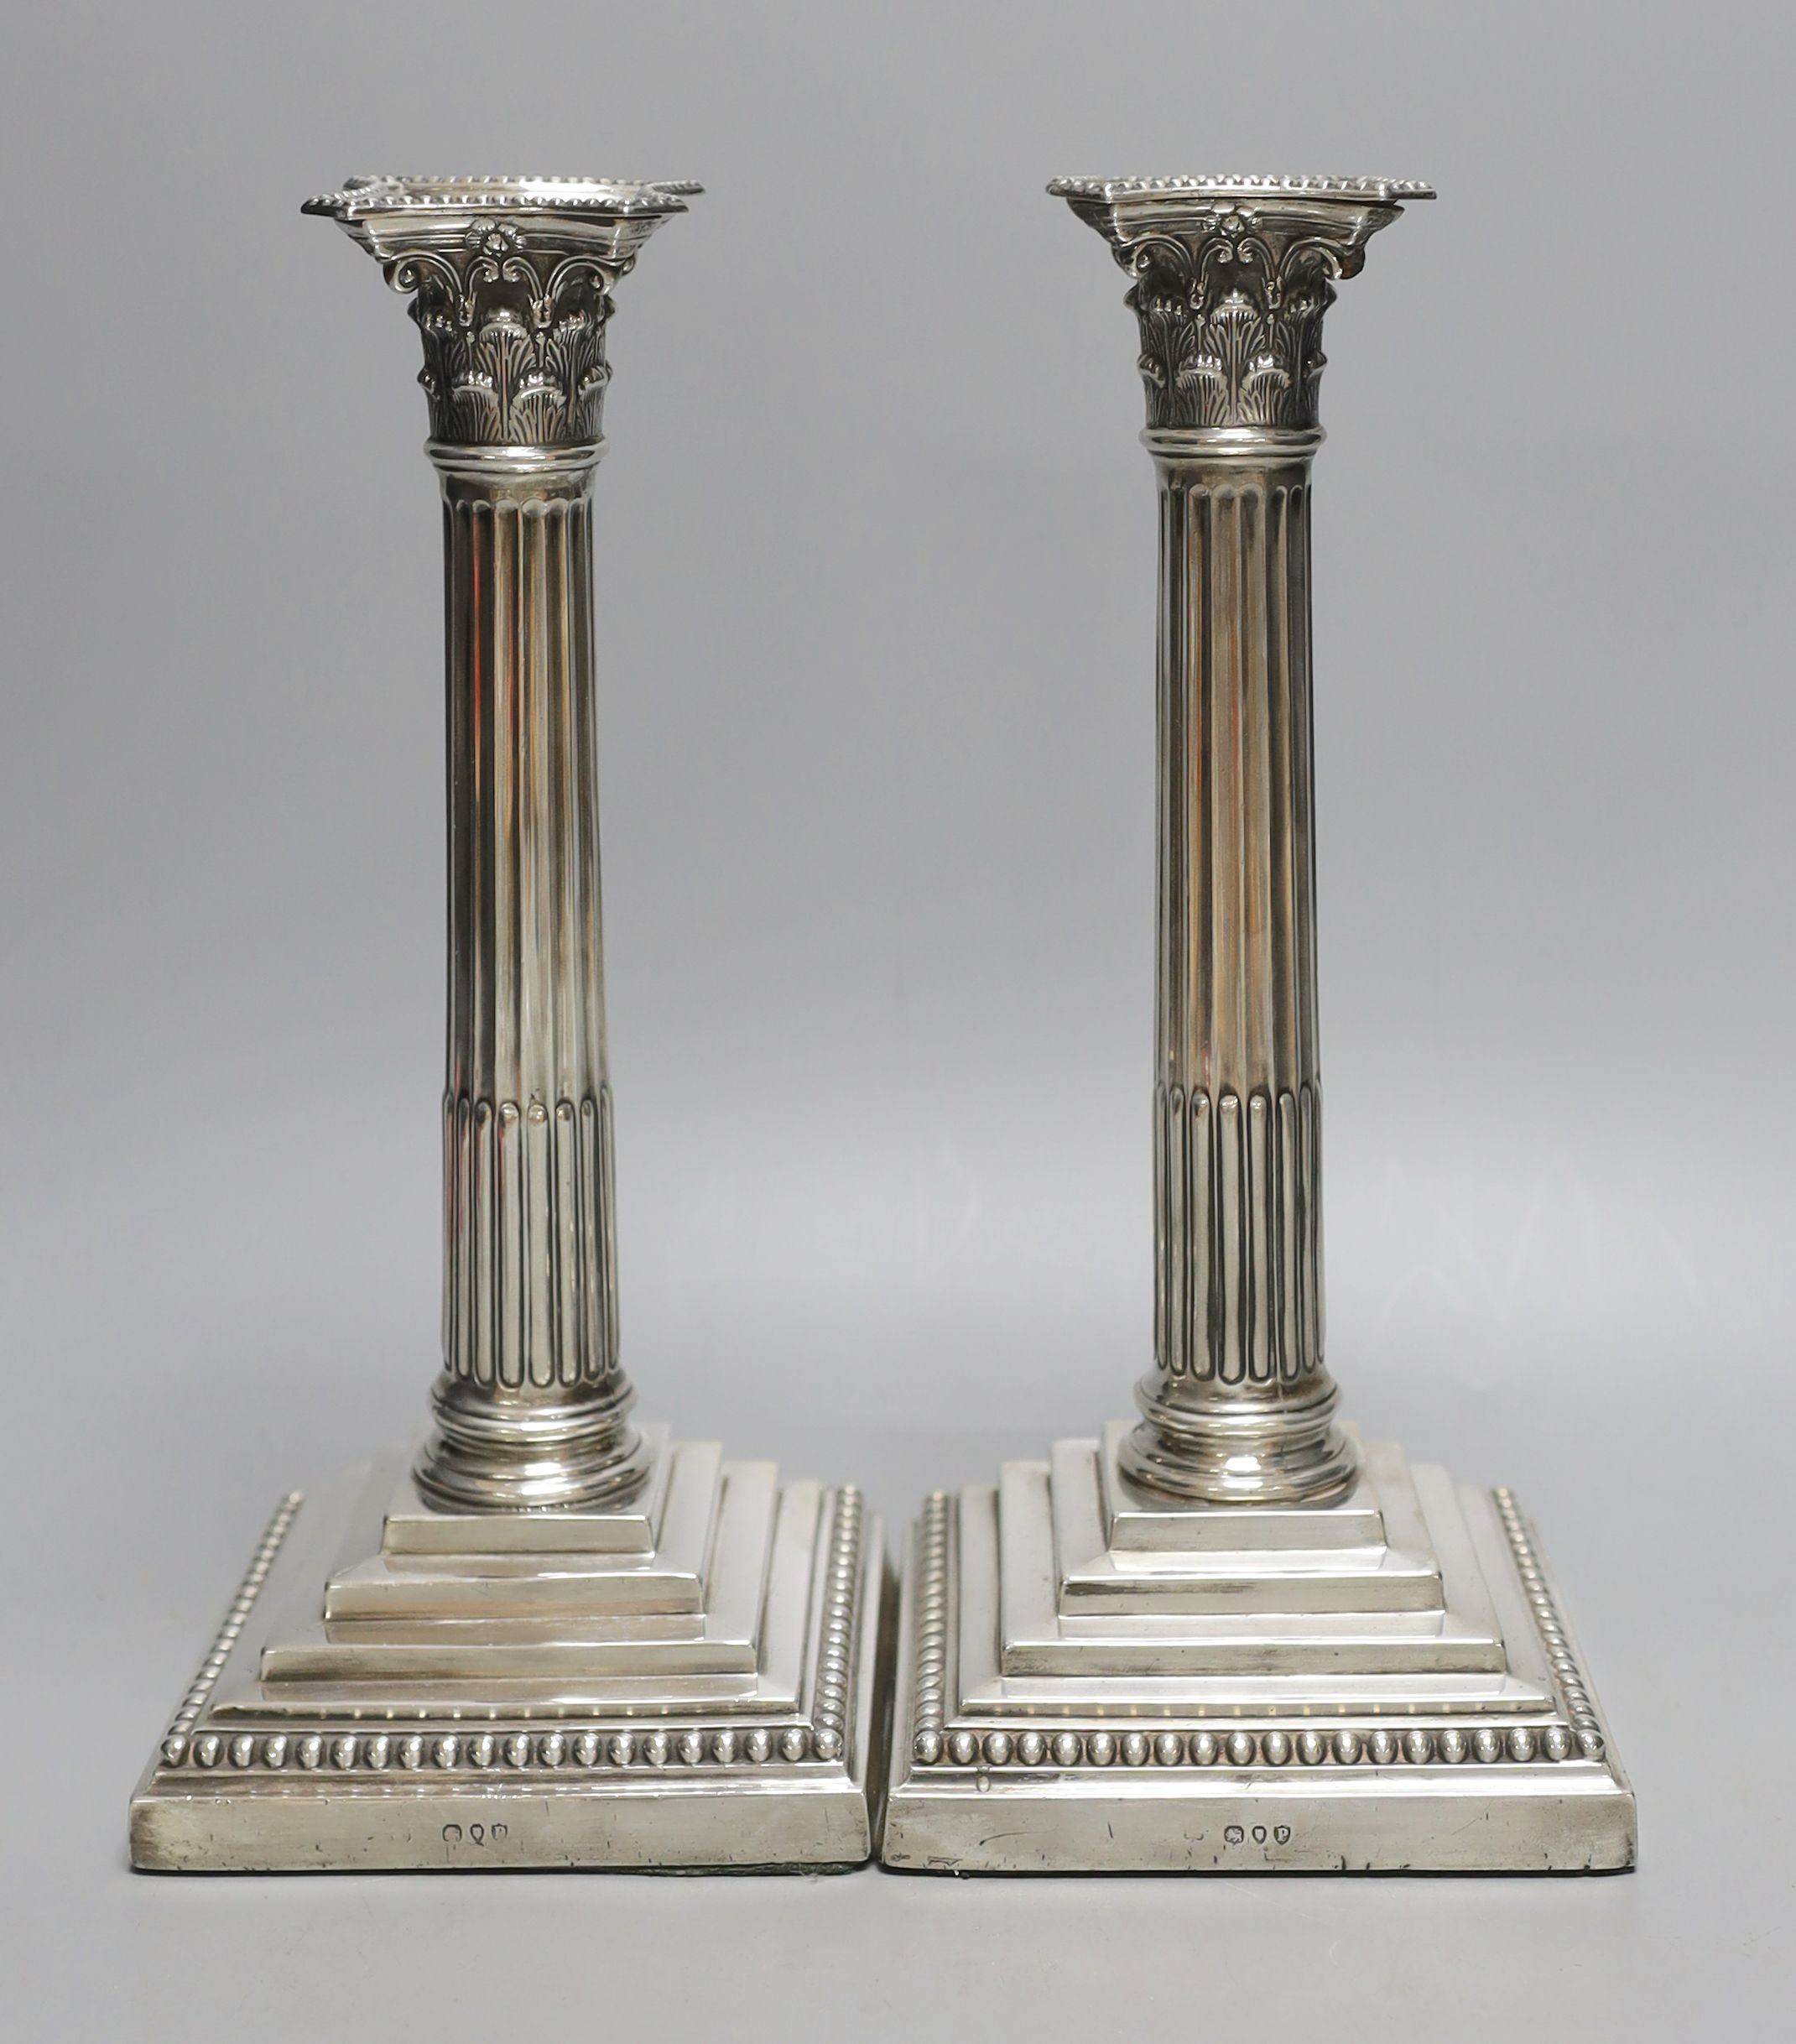 A pair of late Victorian silver Corinthian column candlesticks, maker's mark rubbed, London, 1890, height 27.7cm, weighted.